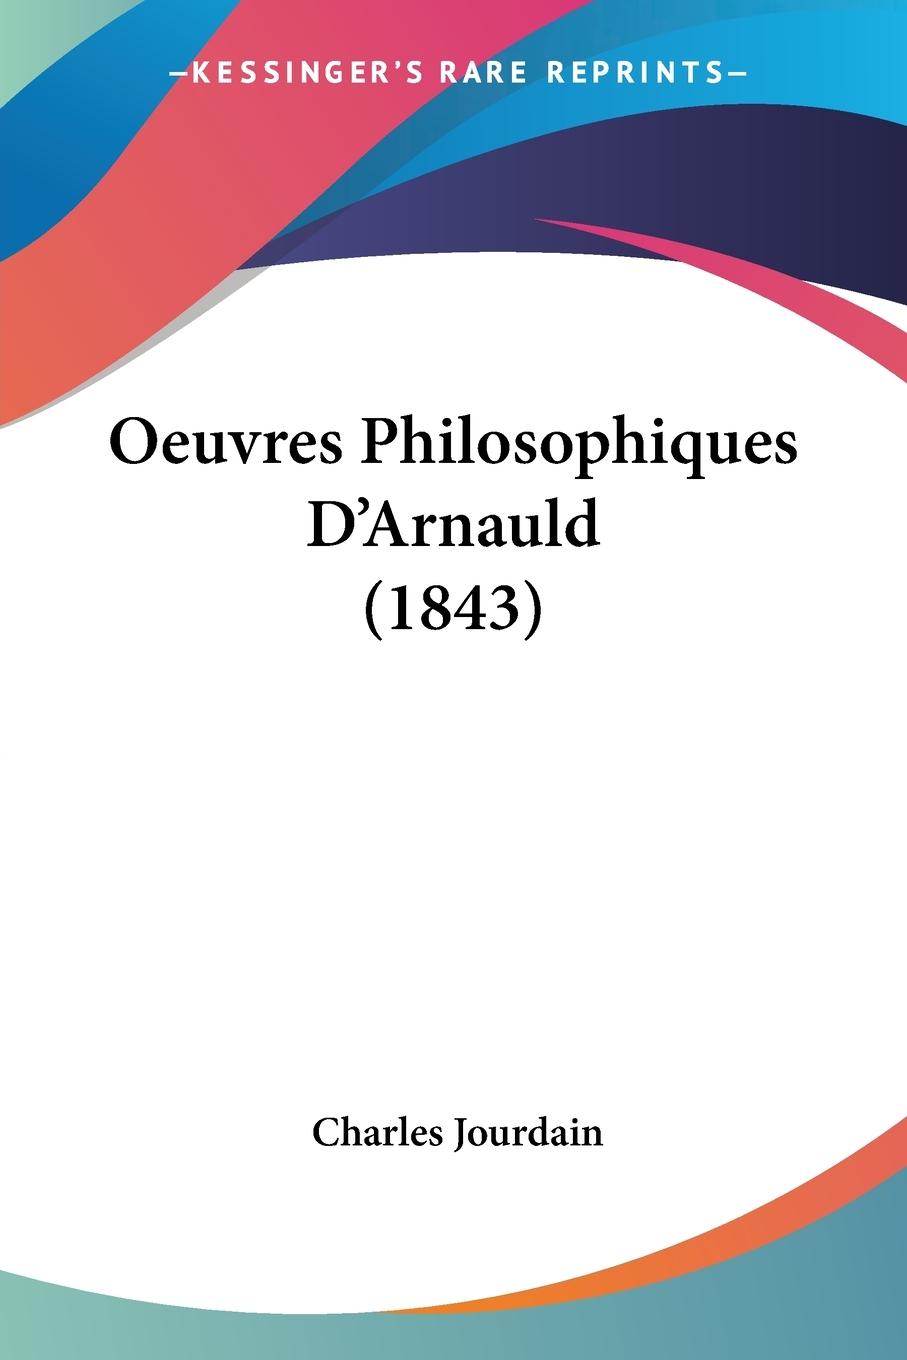 Oeuvres Philosophiques D Arnauld (1843)